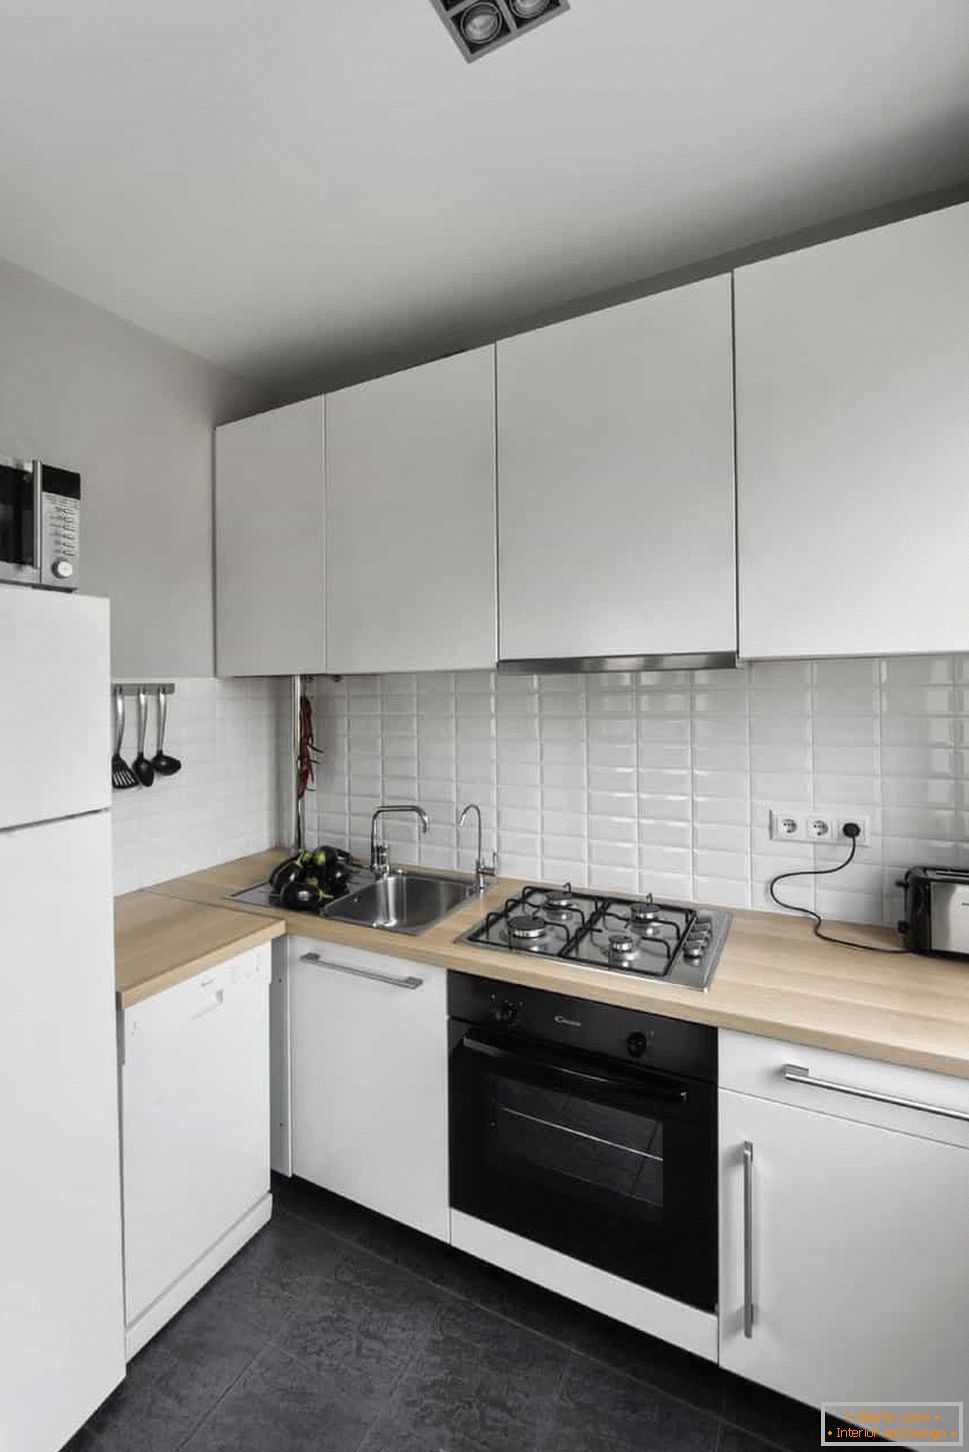 Built-in appliances in the kitchen